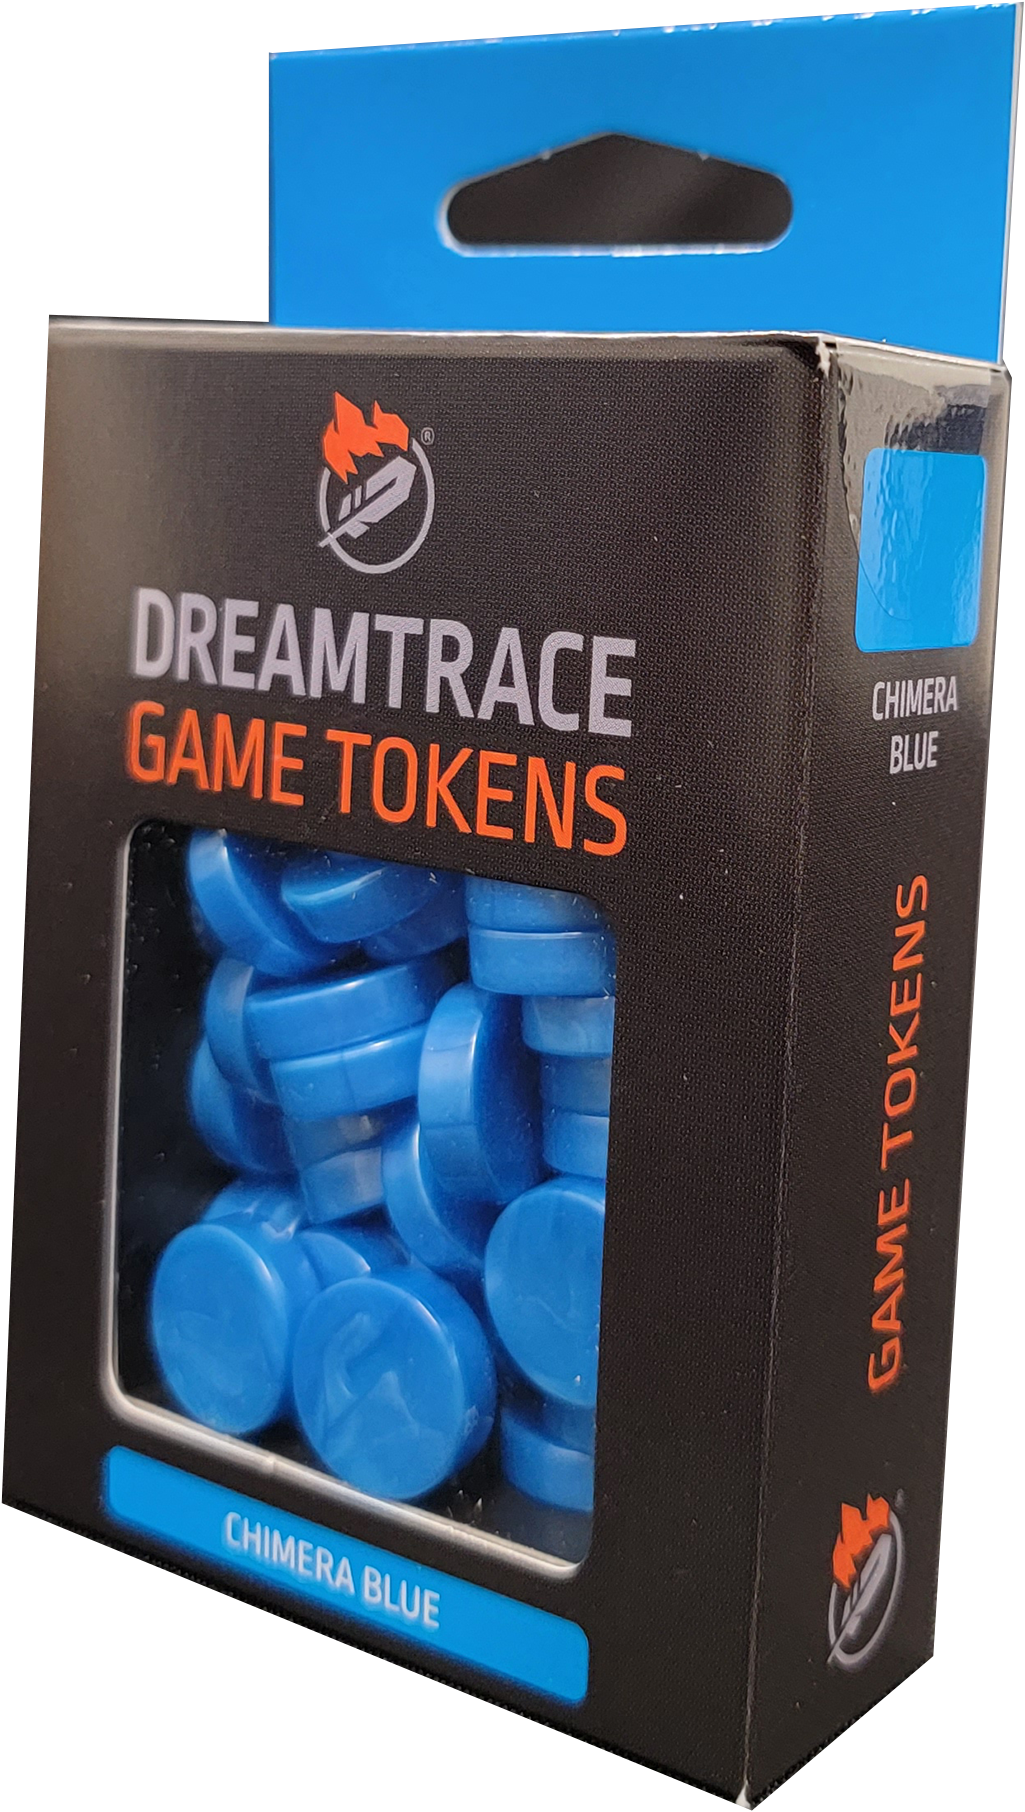 Dreamtrace Gaming Tokens: Chimera Blue 